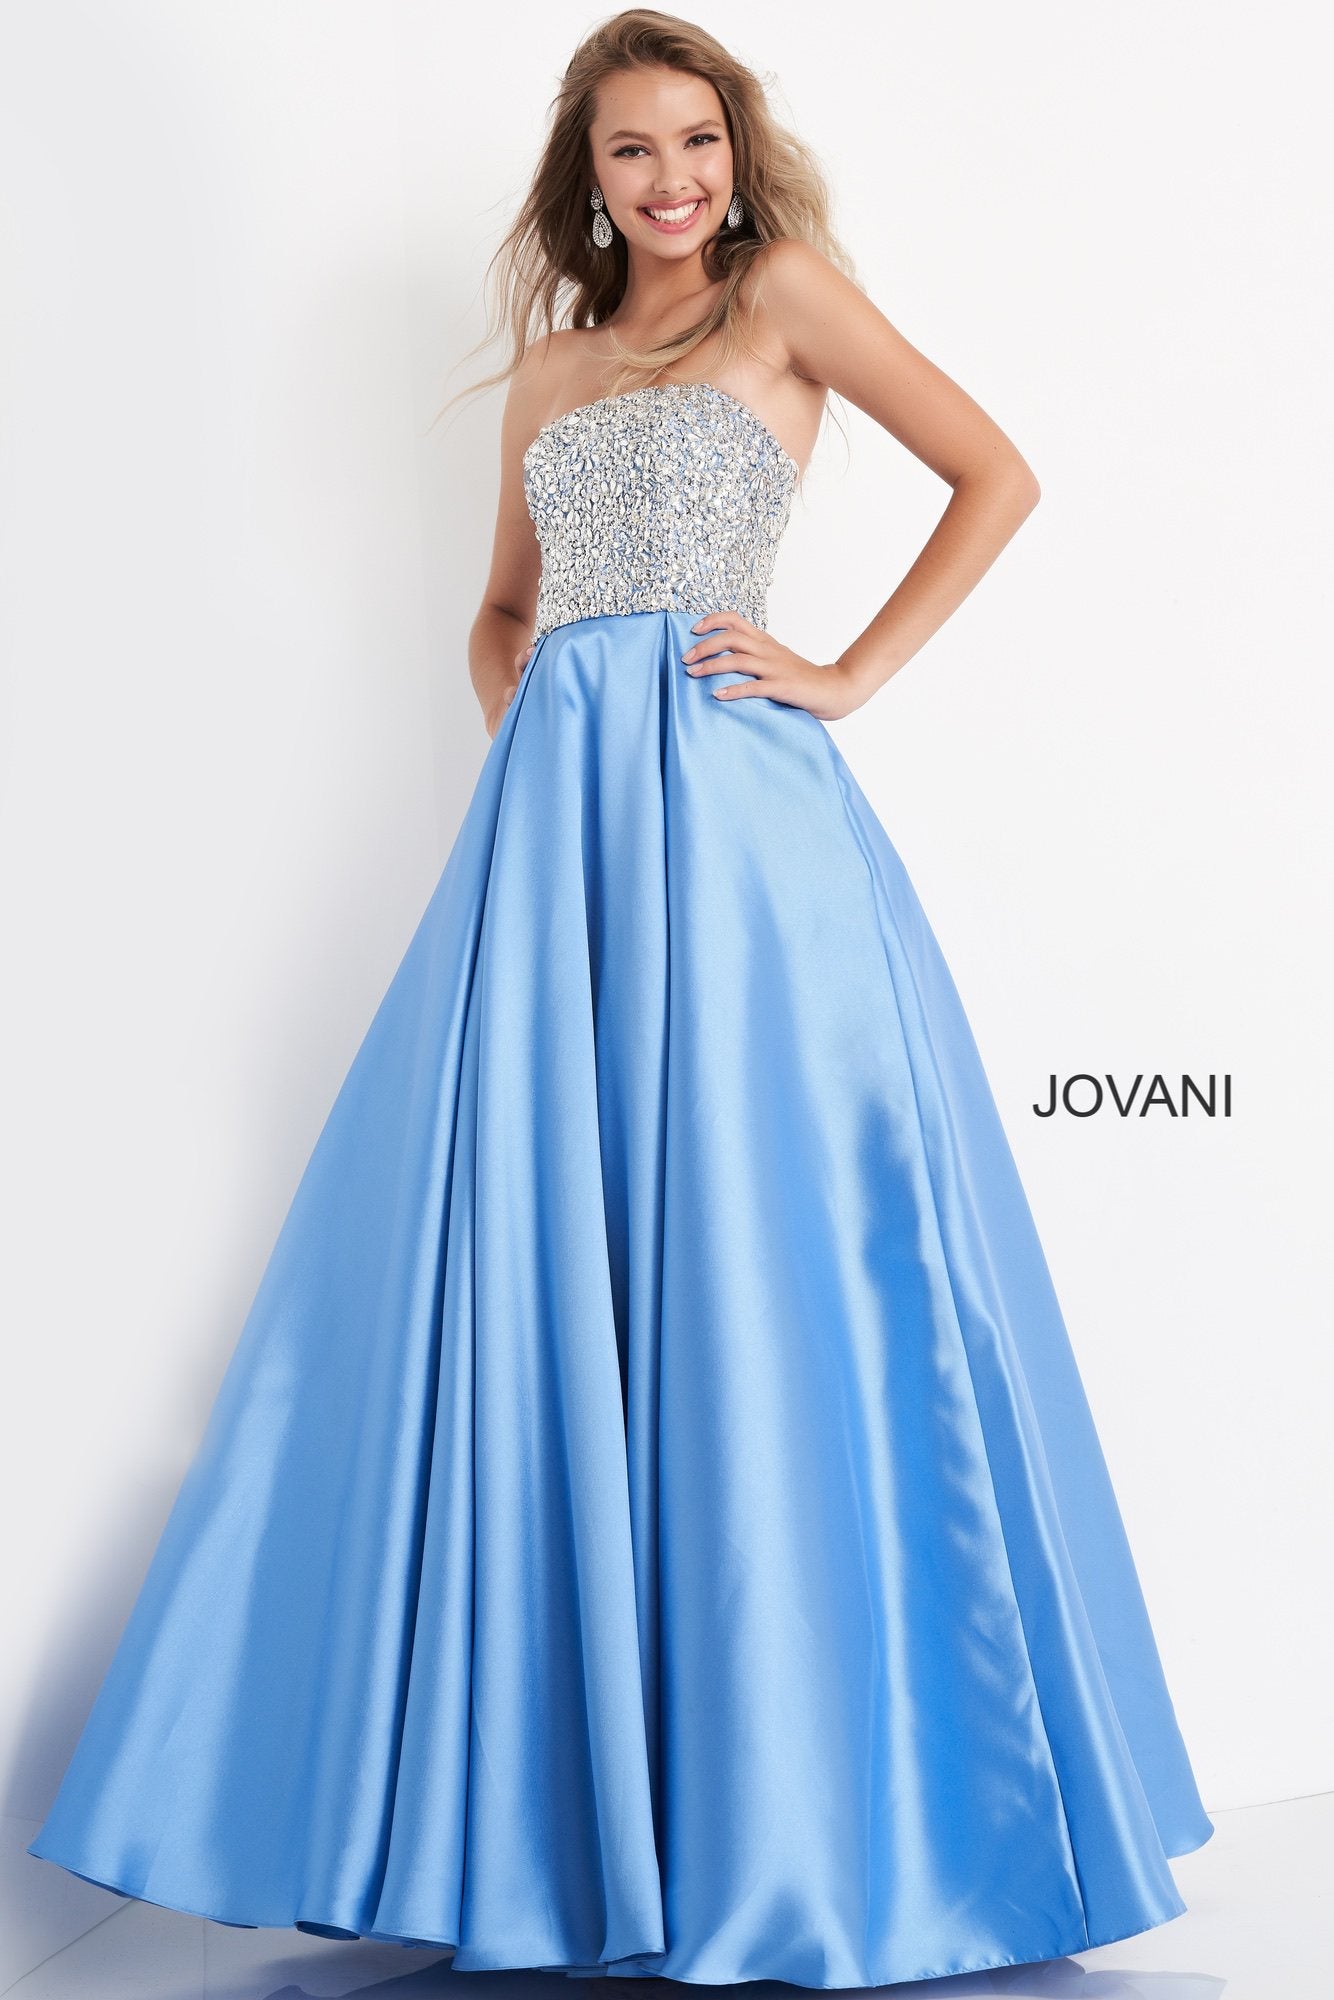 Shop Designer Party Wear Gowns from Asopalav